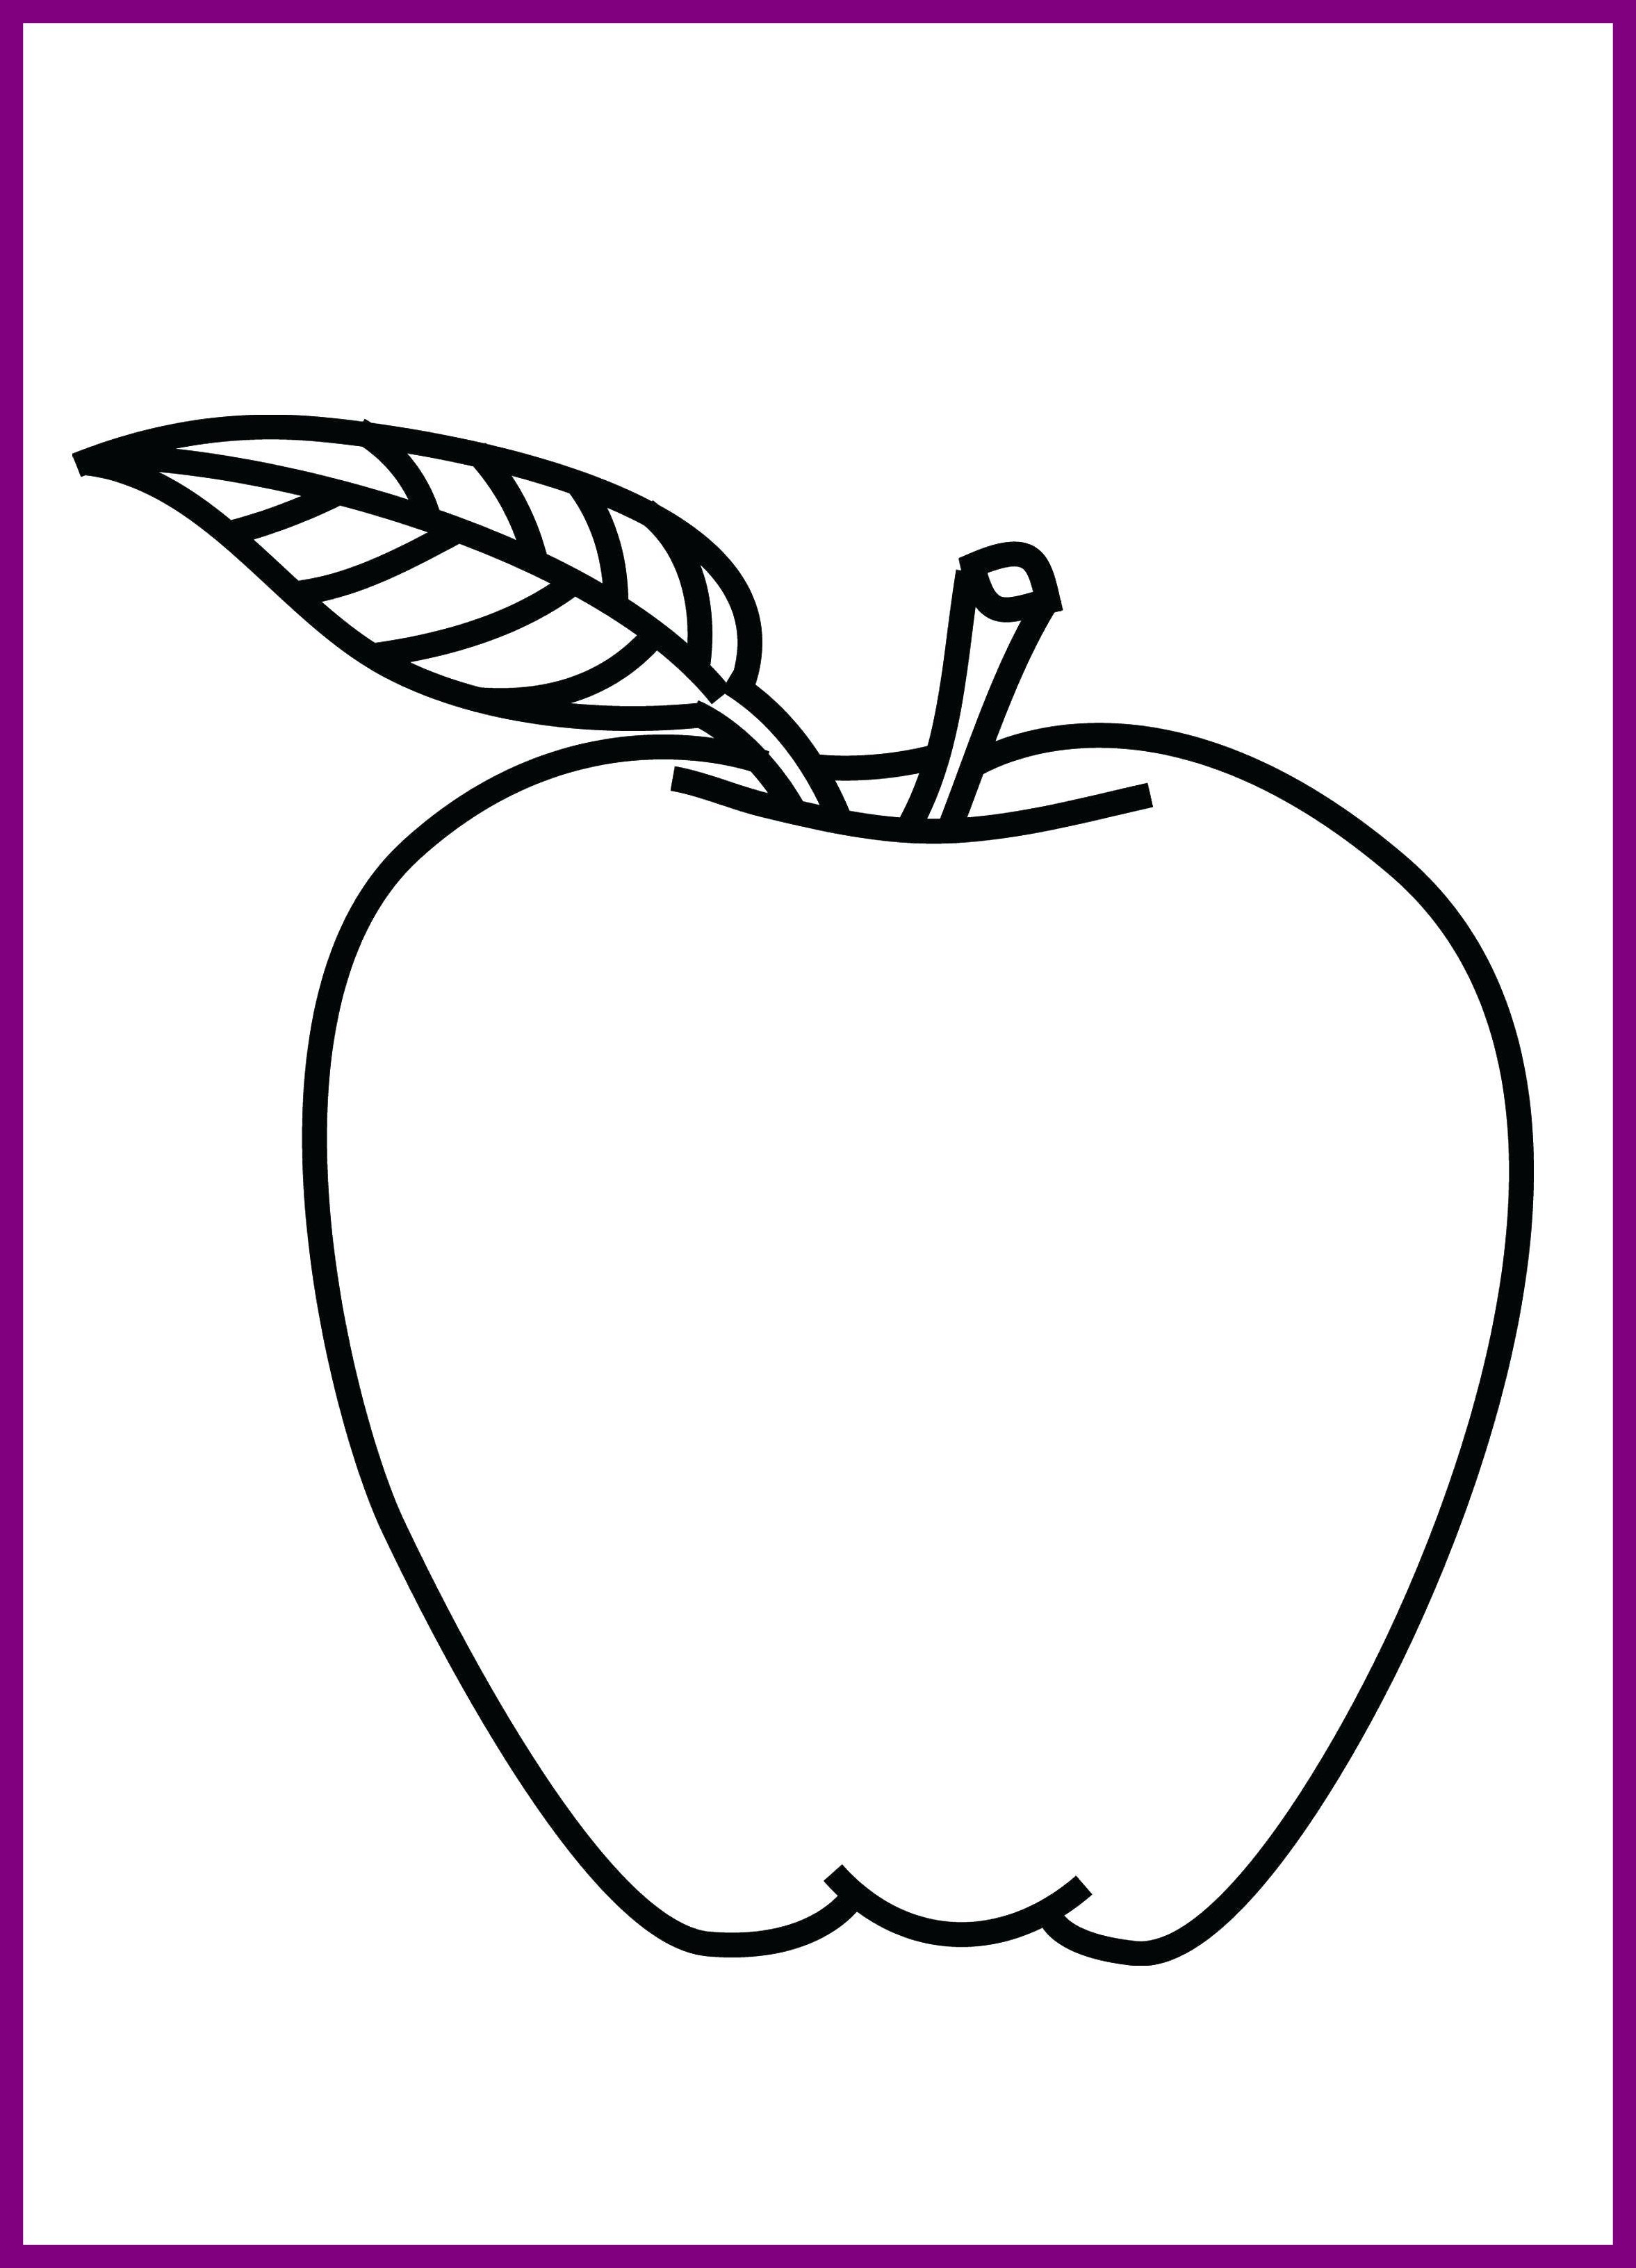 Apple Logo Coloring Pages at GetColorings.com | Free printable